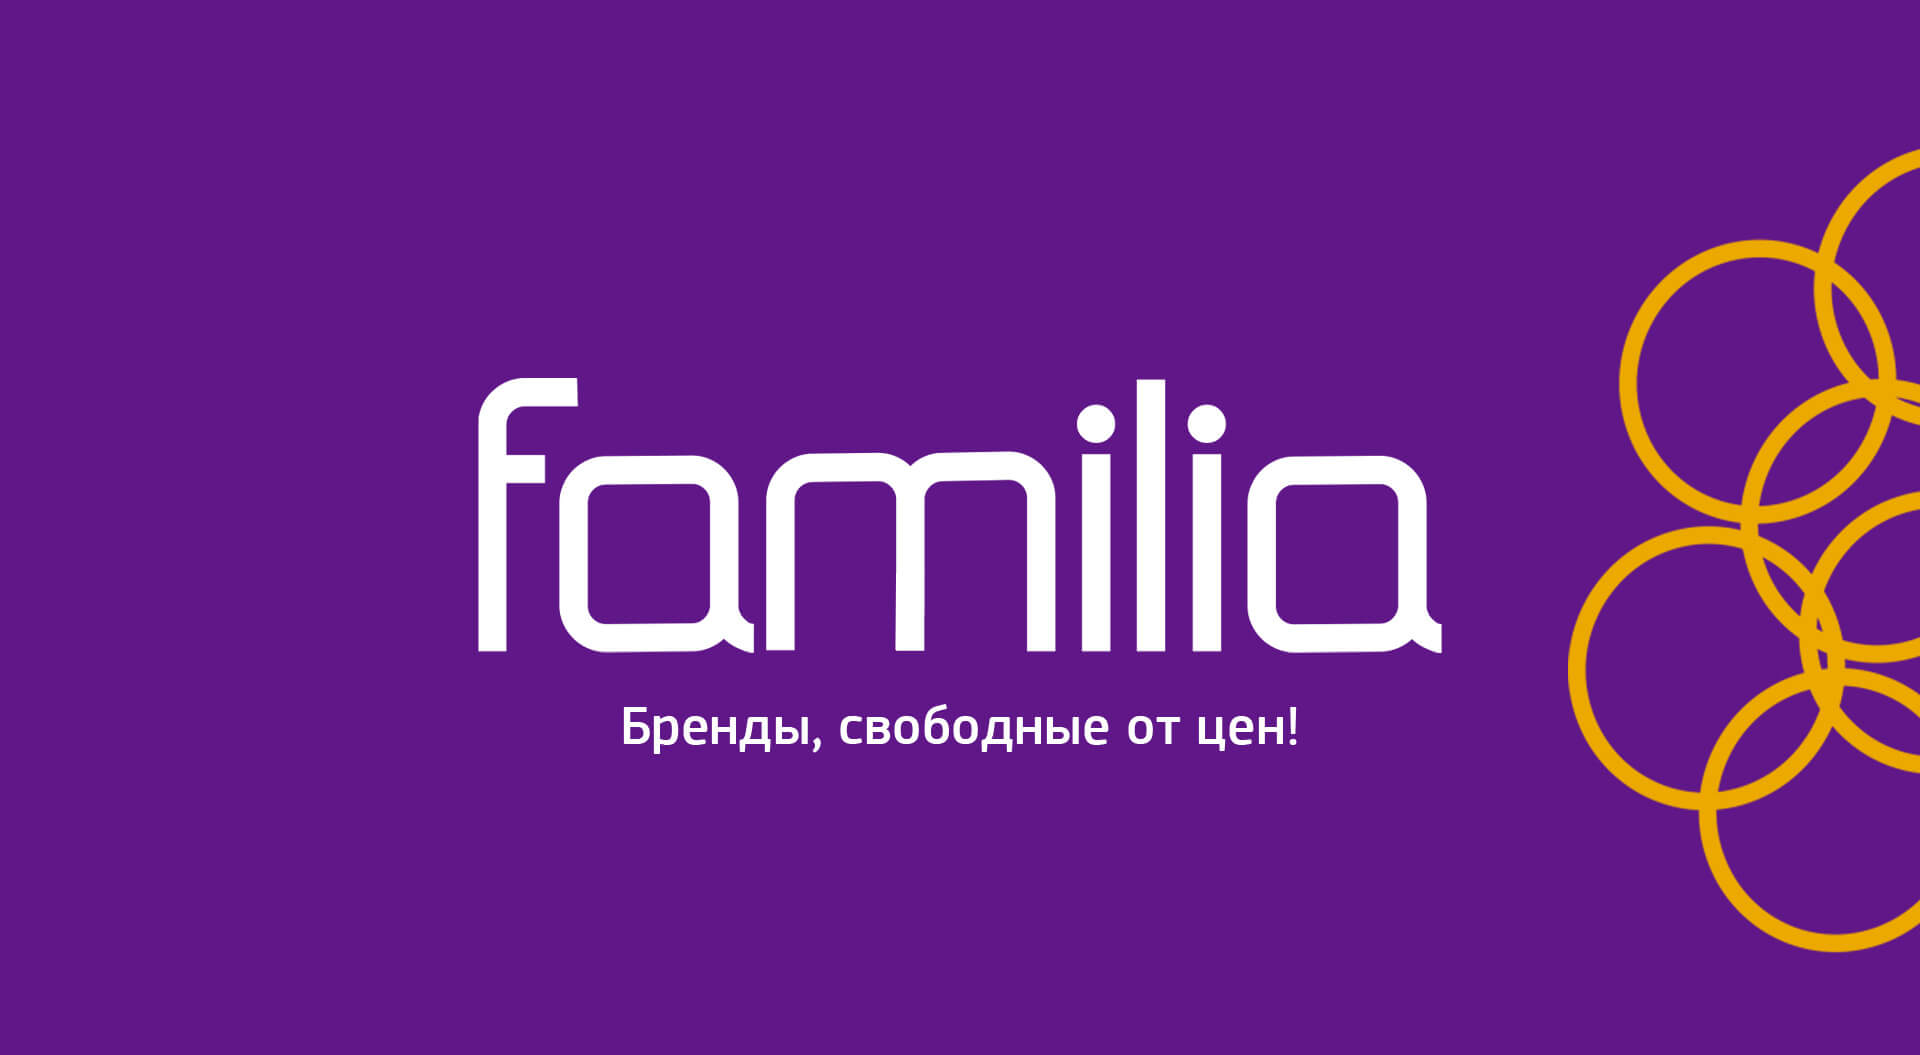 Familia Russia, Store Entrance, Interior Design, Spectacular Ceiling Lighting, Merchandising and Equipment, Retail Branding, Brand Identity, Graphic Communications - CampbellRigg Agency